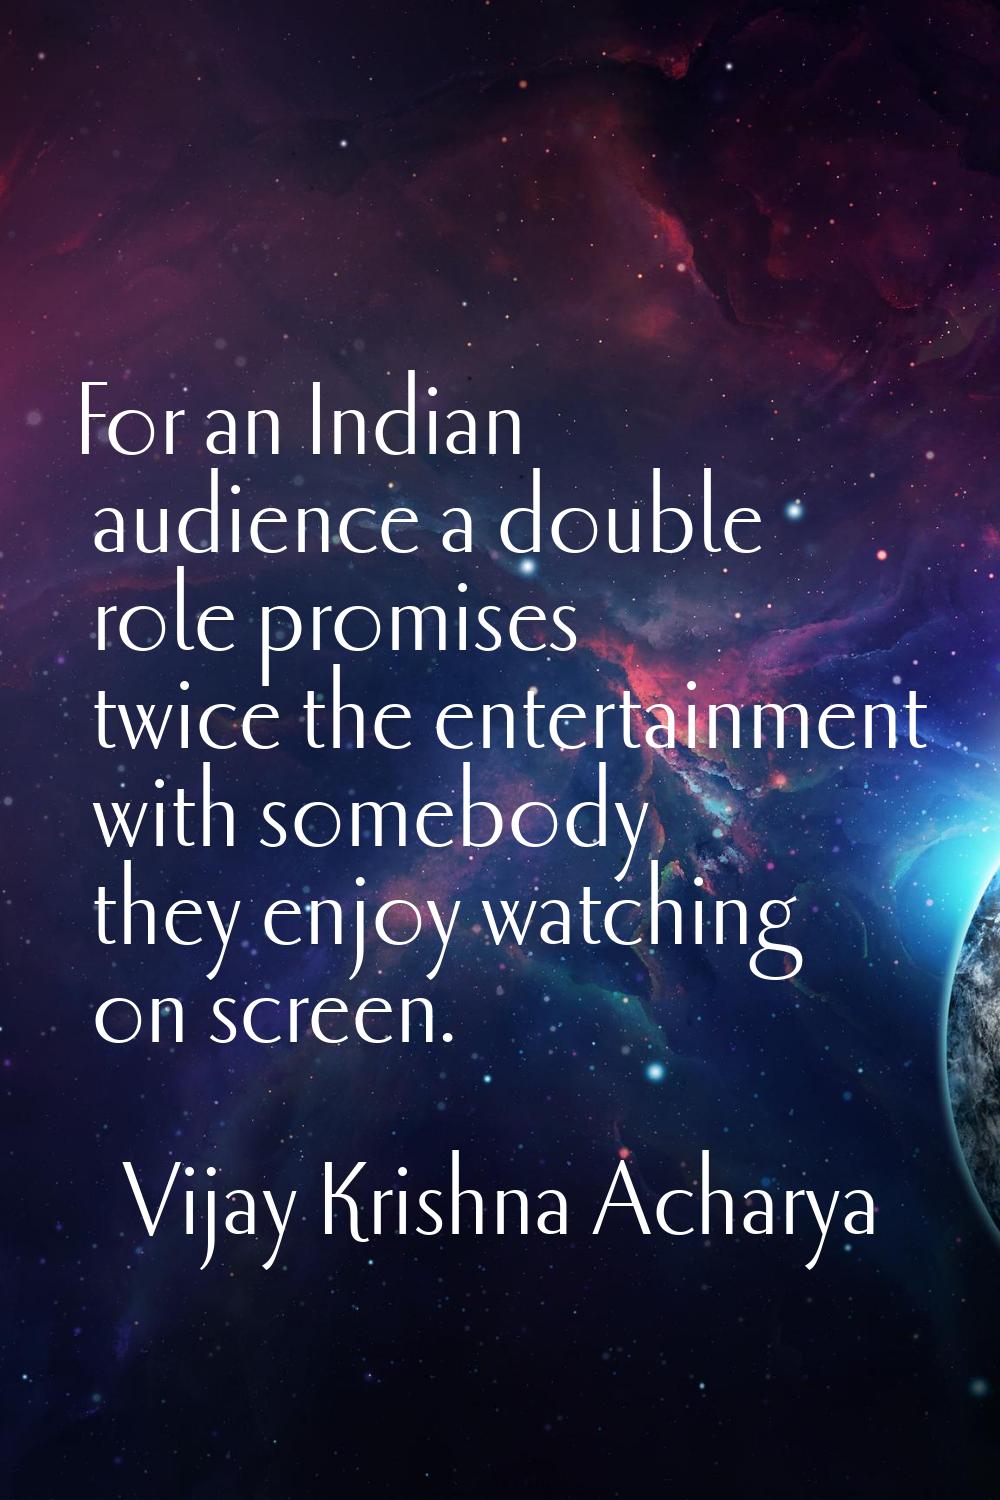 For an Indian audience a double role promises twice the entertainment with somebody they enjoy watc